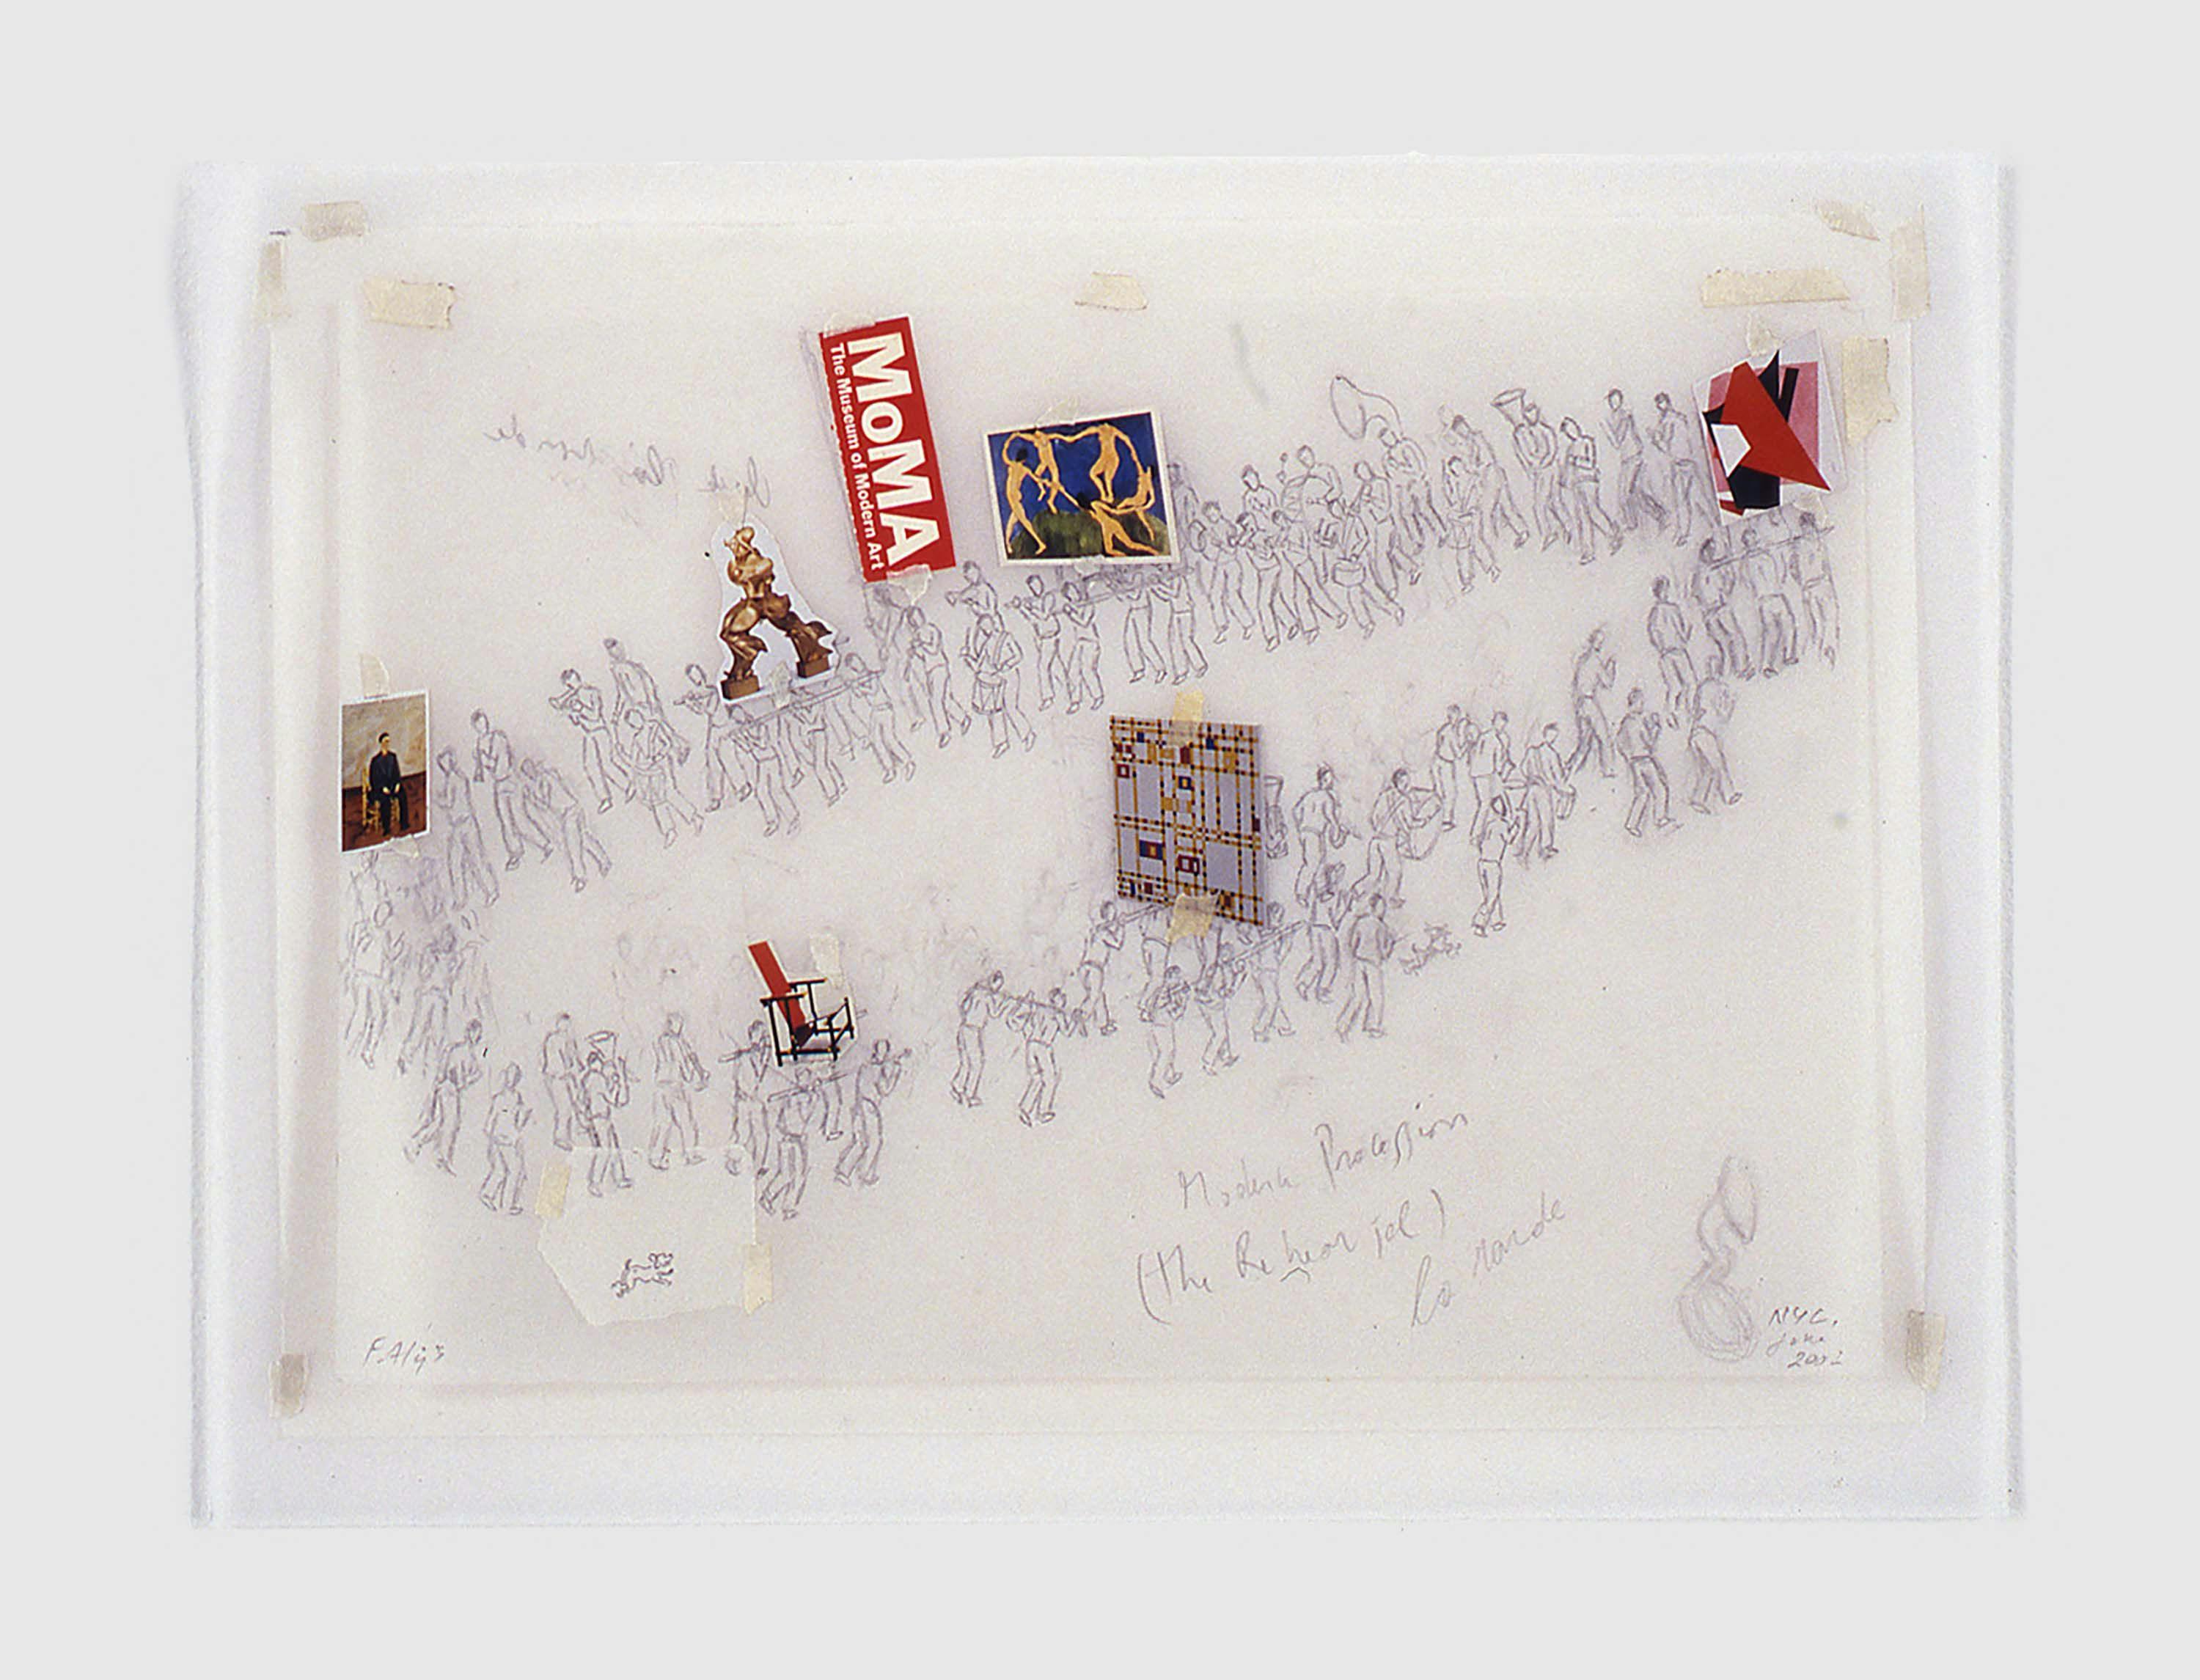 A drawing from a work by Francis Al√øs, titled The Modern Procession, dated 2002.